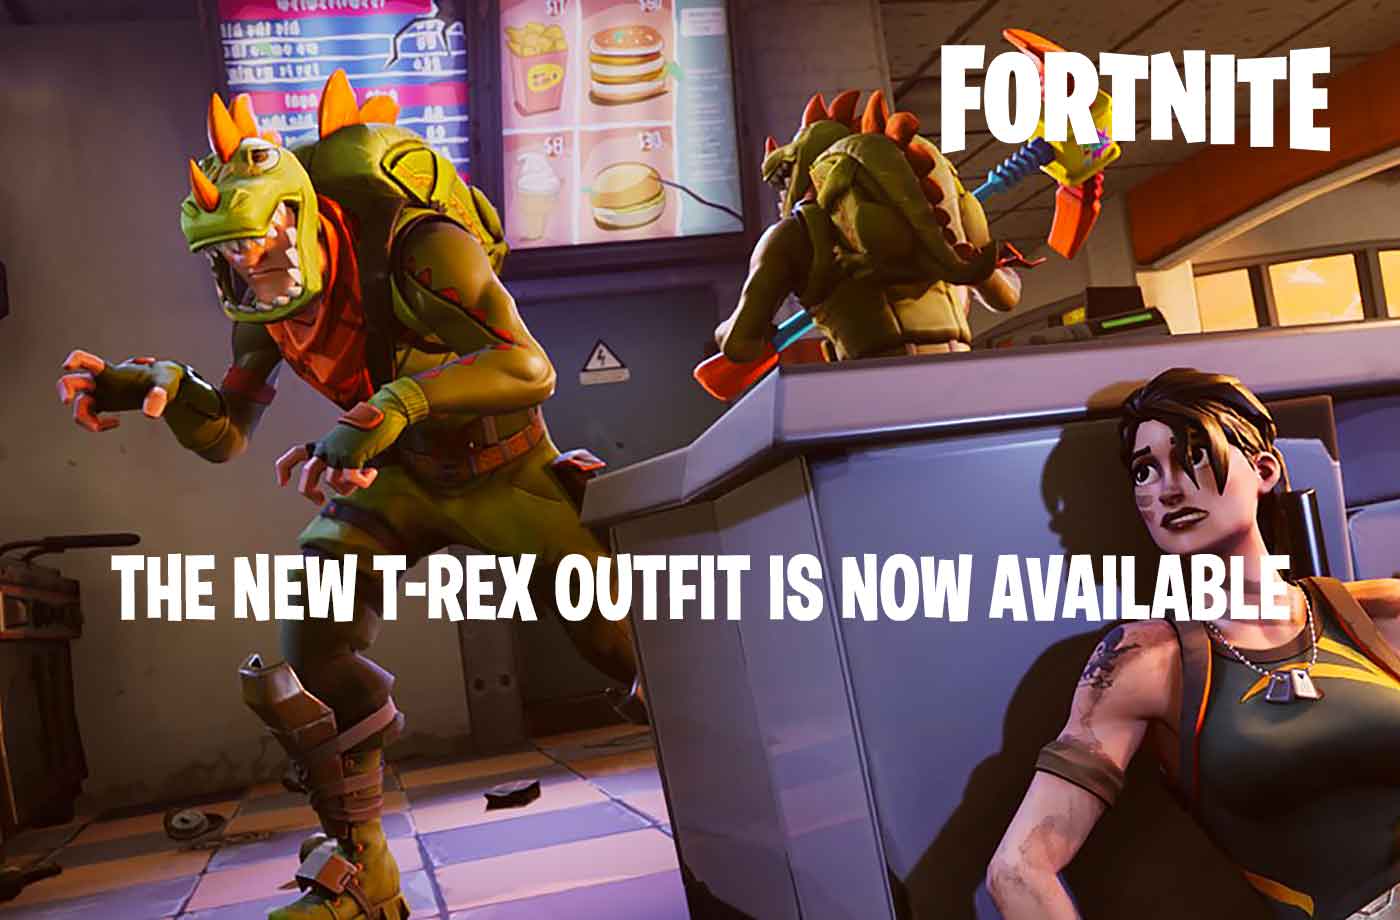 fortnite battle royale the new t rex outfit is now available how to unlock the skin - how many skins are there in fortnite battle royale